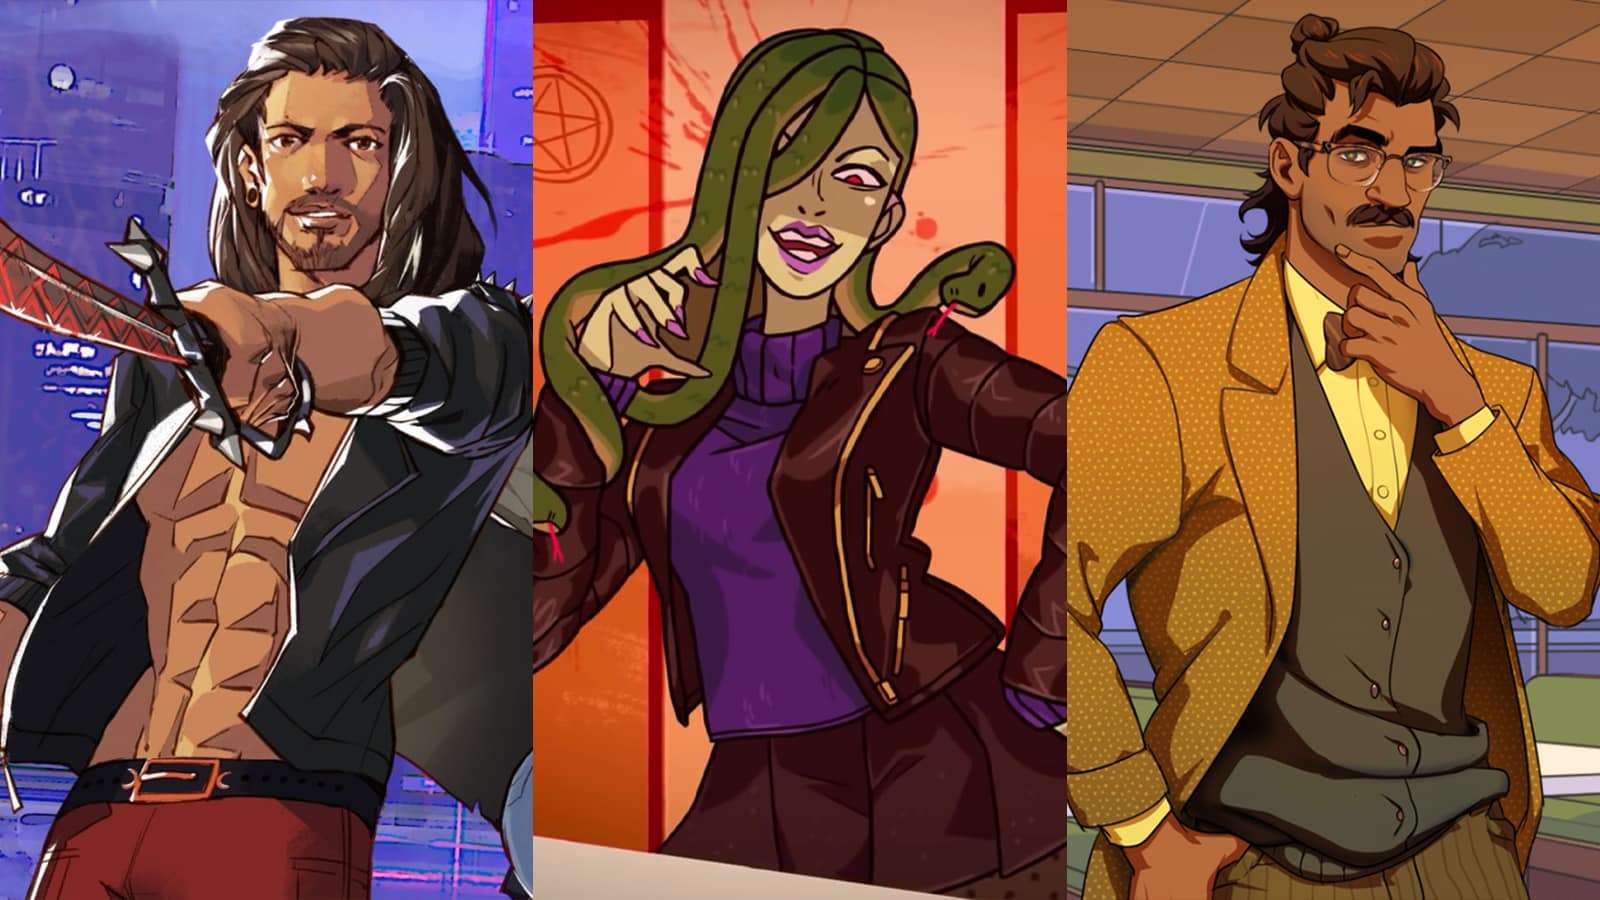 Posters for the dating sims Boyfriend Dungeon, Monster Prom, and Dream Daddy